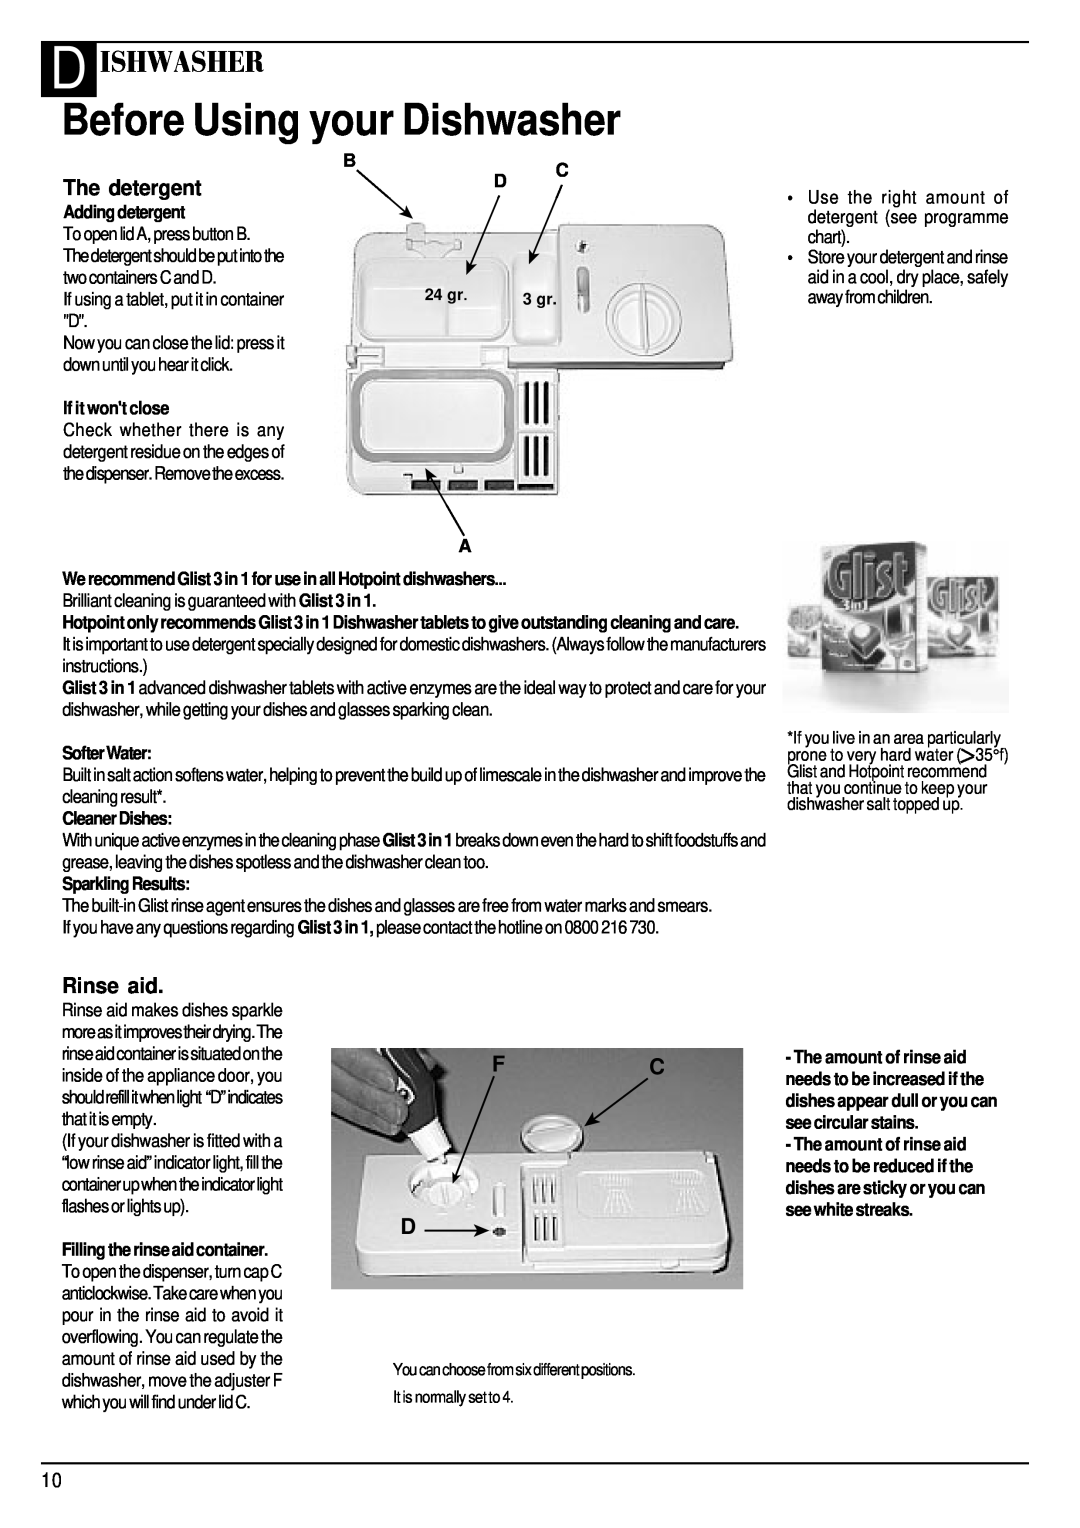 Hotpoint BCI450 manual Before Using your Dishwasher, D Ishwasher, The detergent, Rinse aid, Fc D, Bc D, Adding detergent 